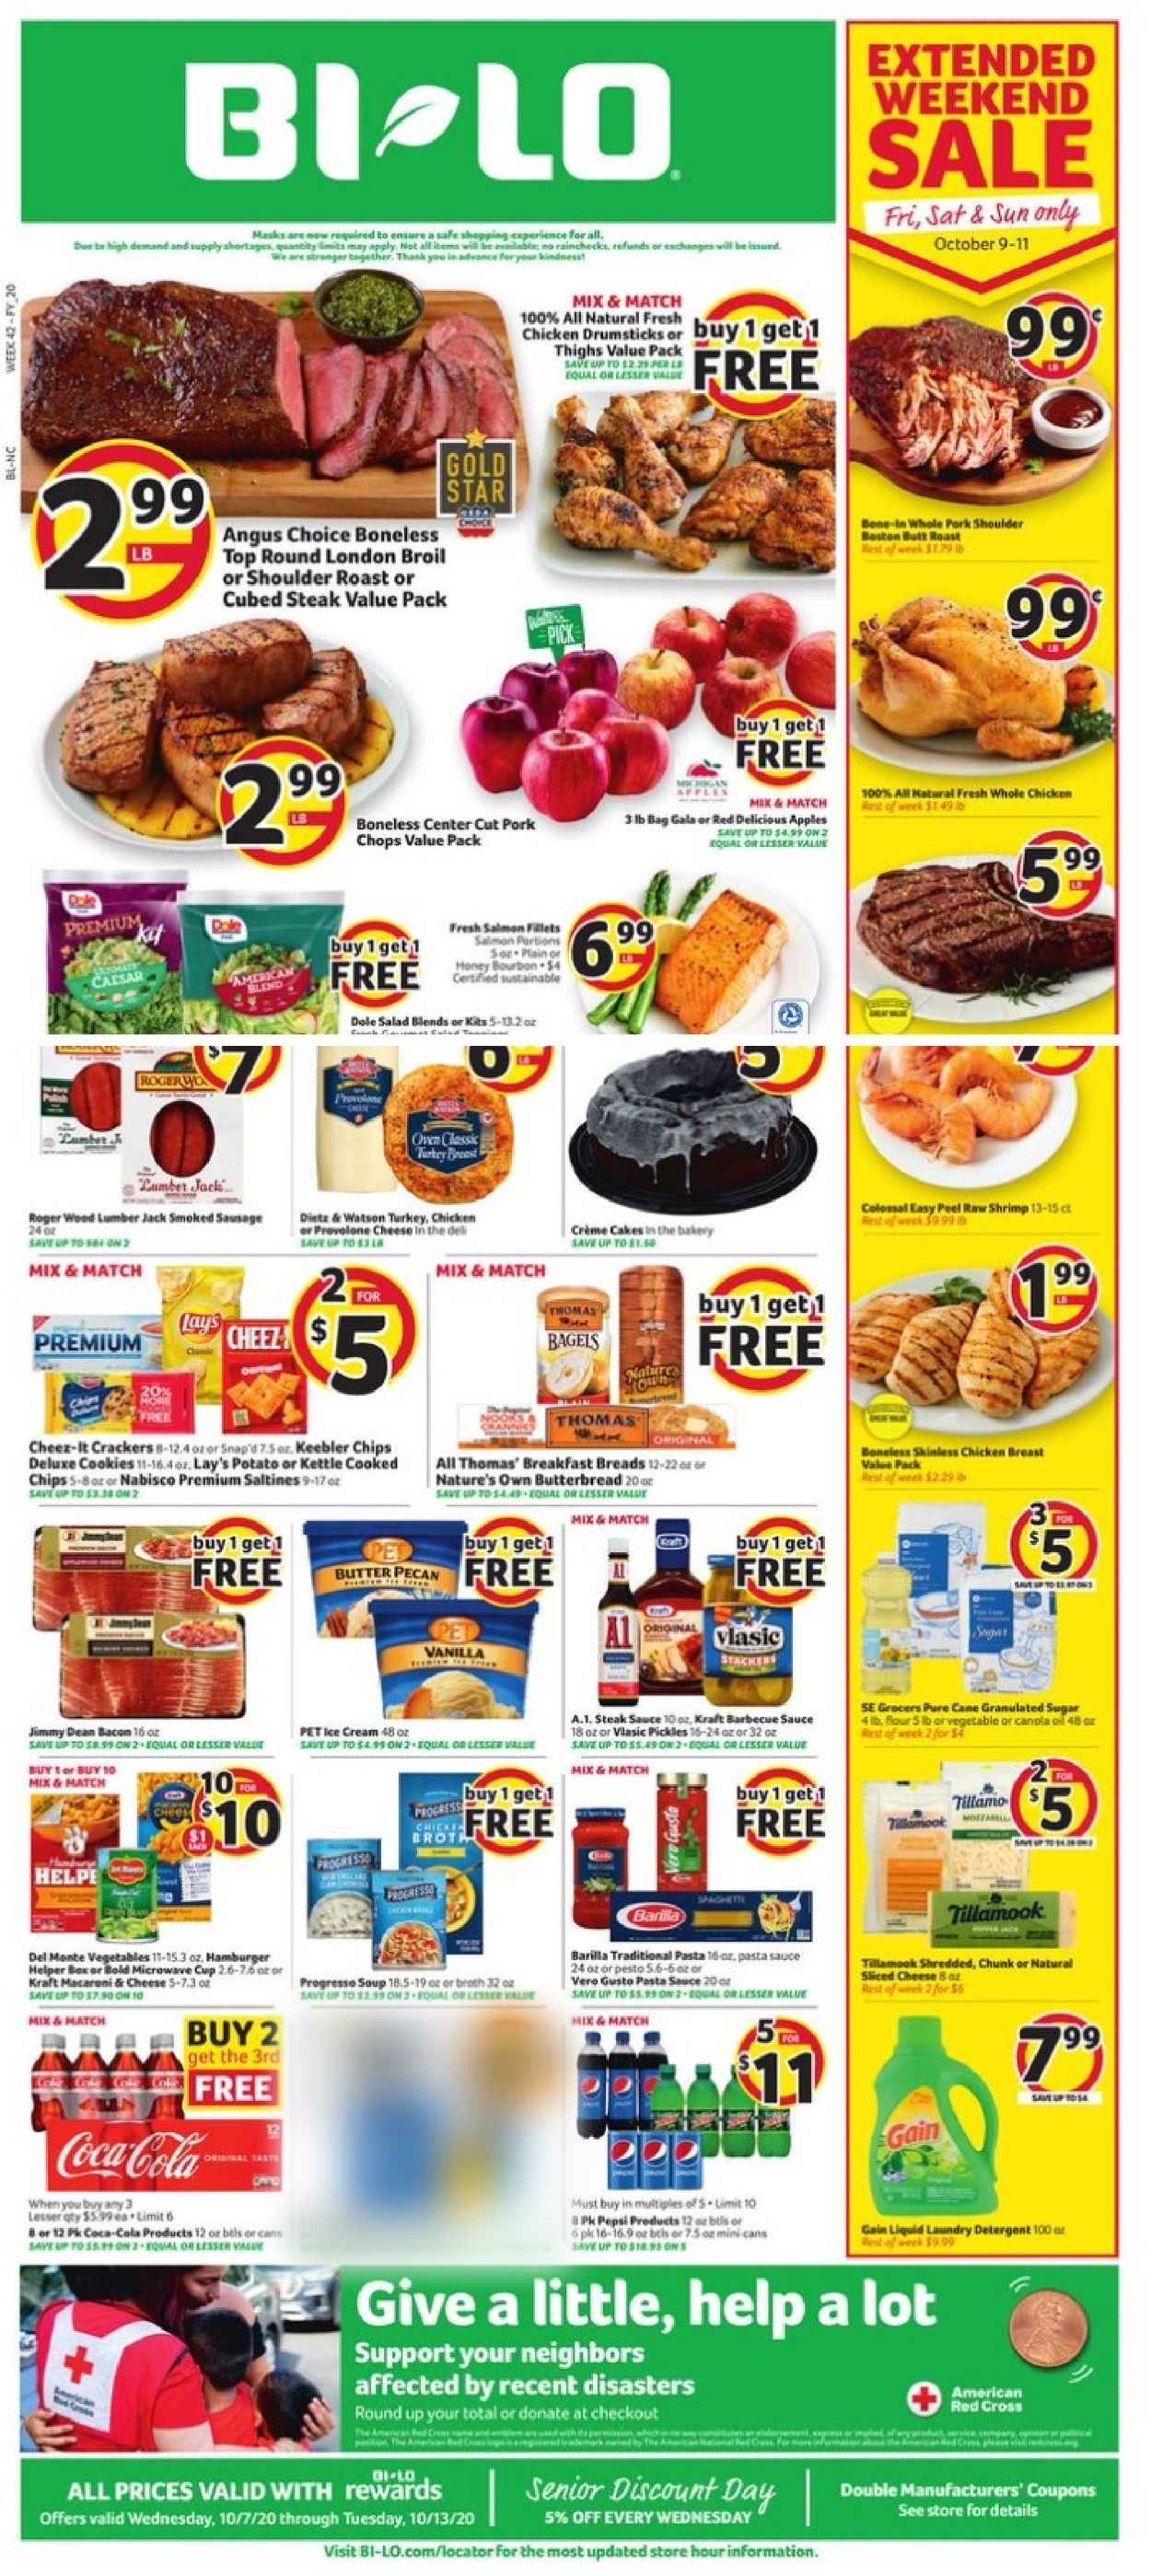 BI-LO Current weekly ad 10/07 - 10/13/2020 - frequent-ads.com